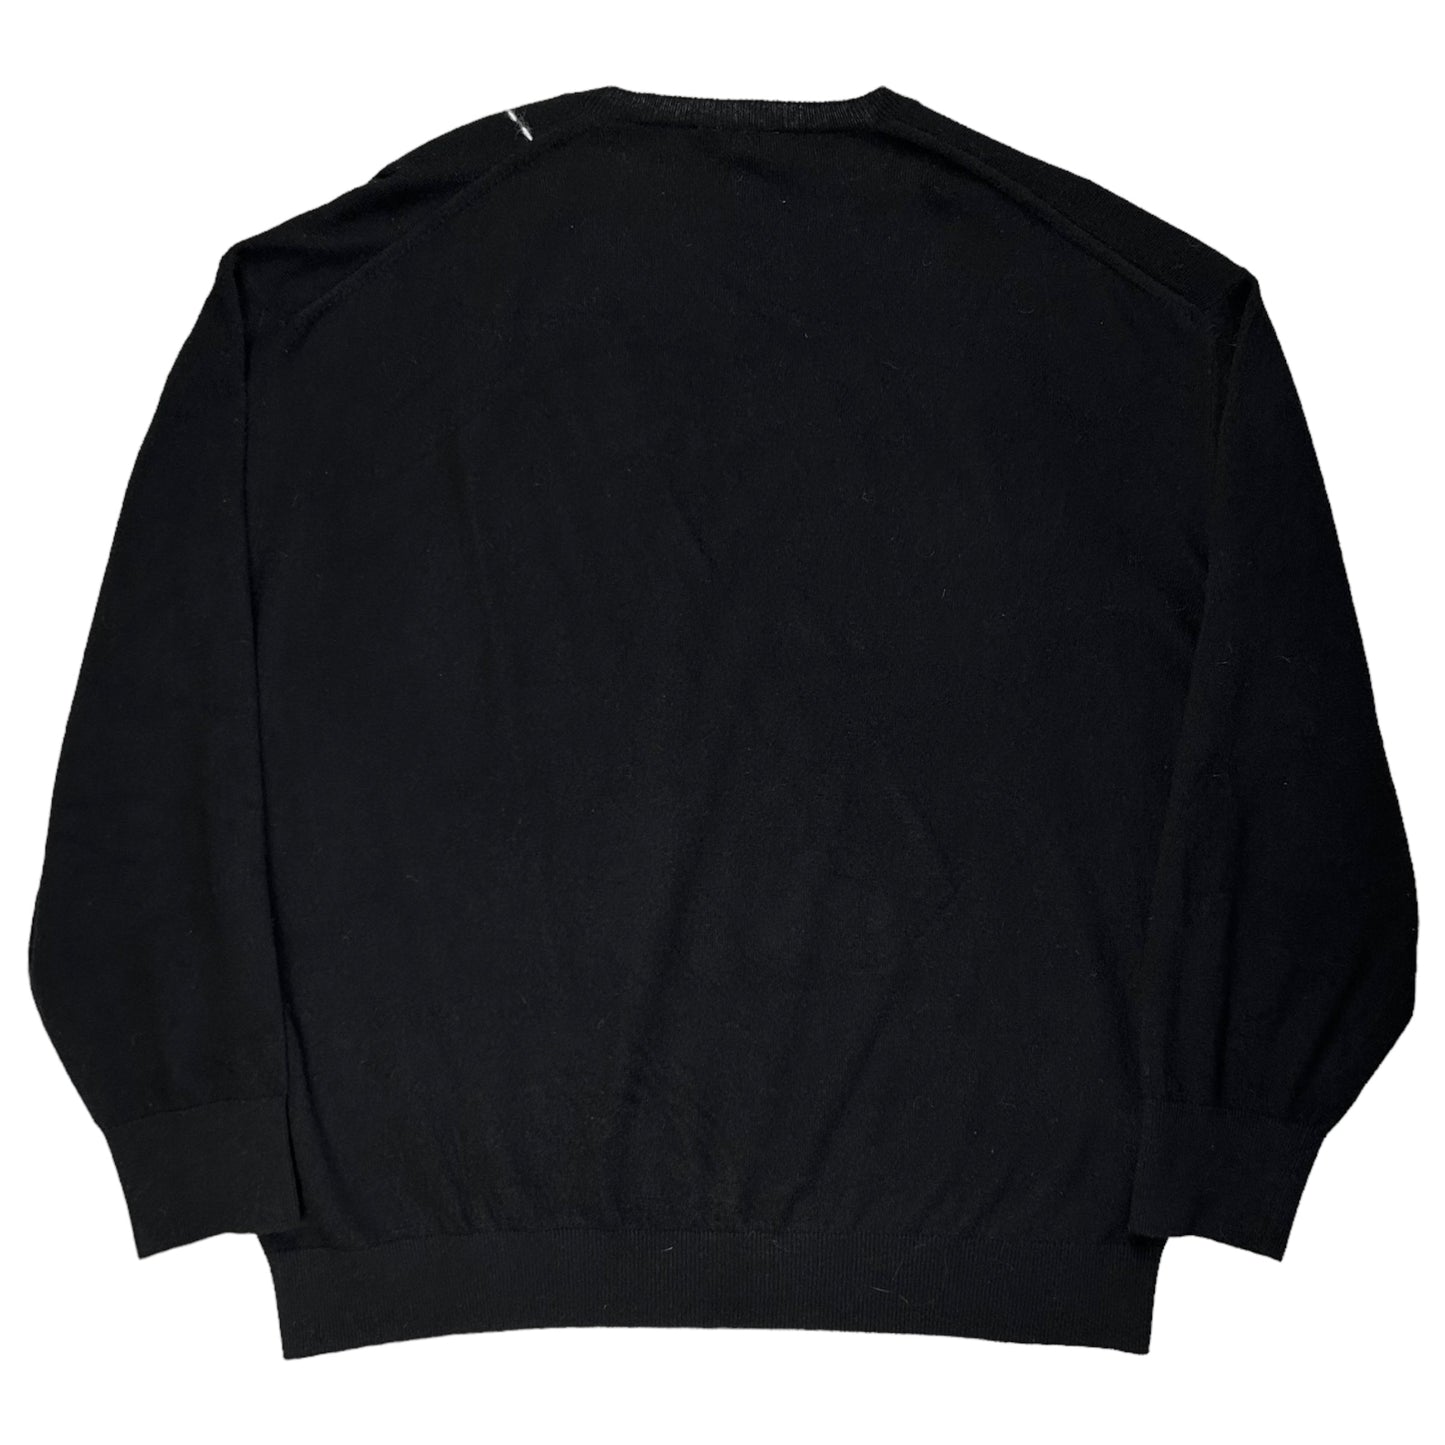 Ann Demeulemeester Visible Stitch Wool Sweater - AW21